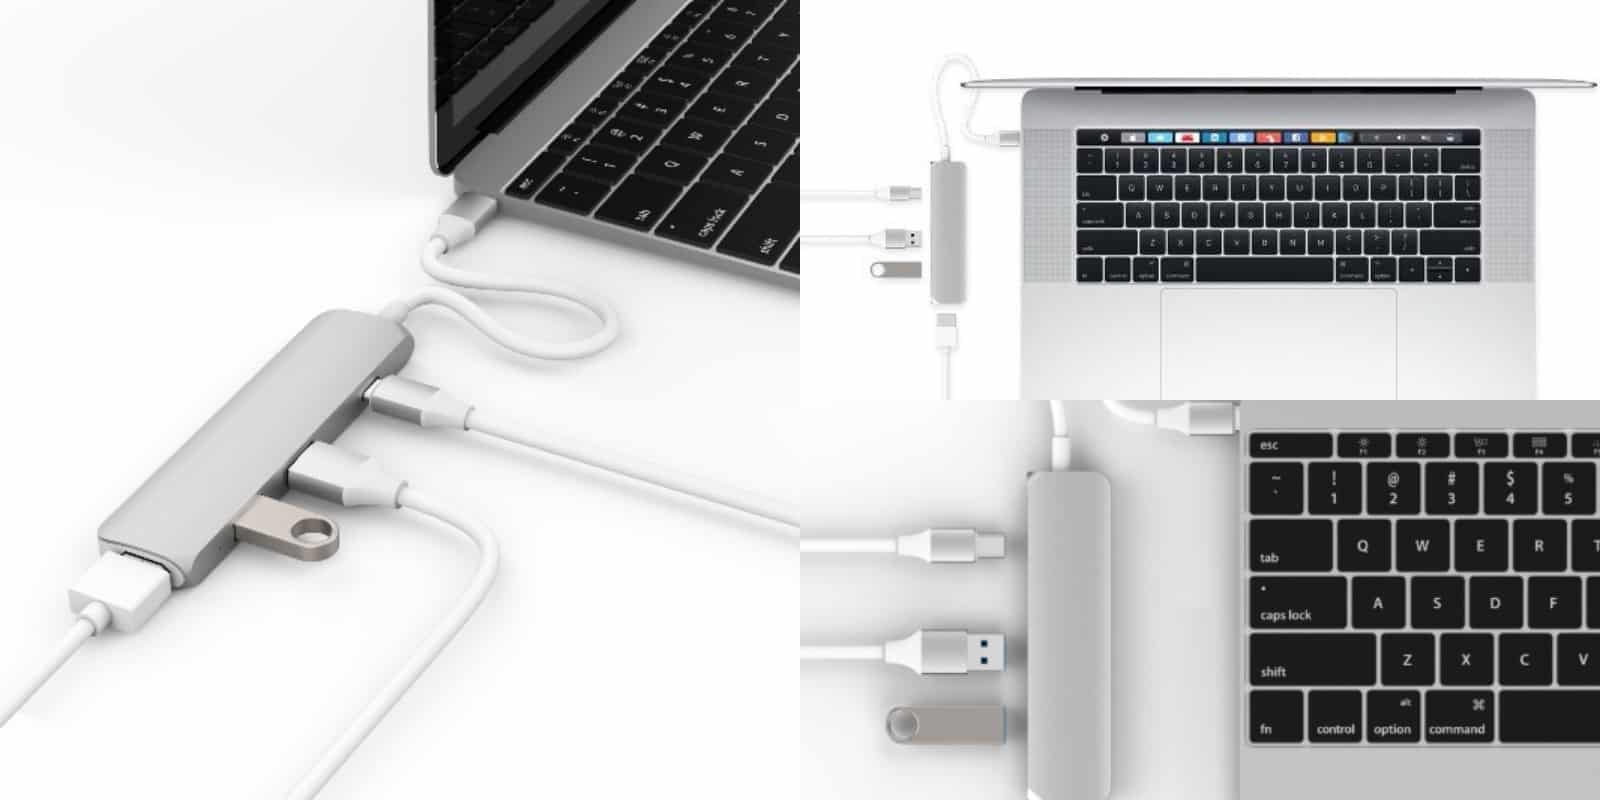 Reclaim your favorite devices by adding two USB 3.0 connections, HDMI, and more to your MacBook.